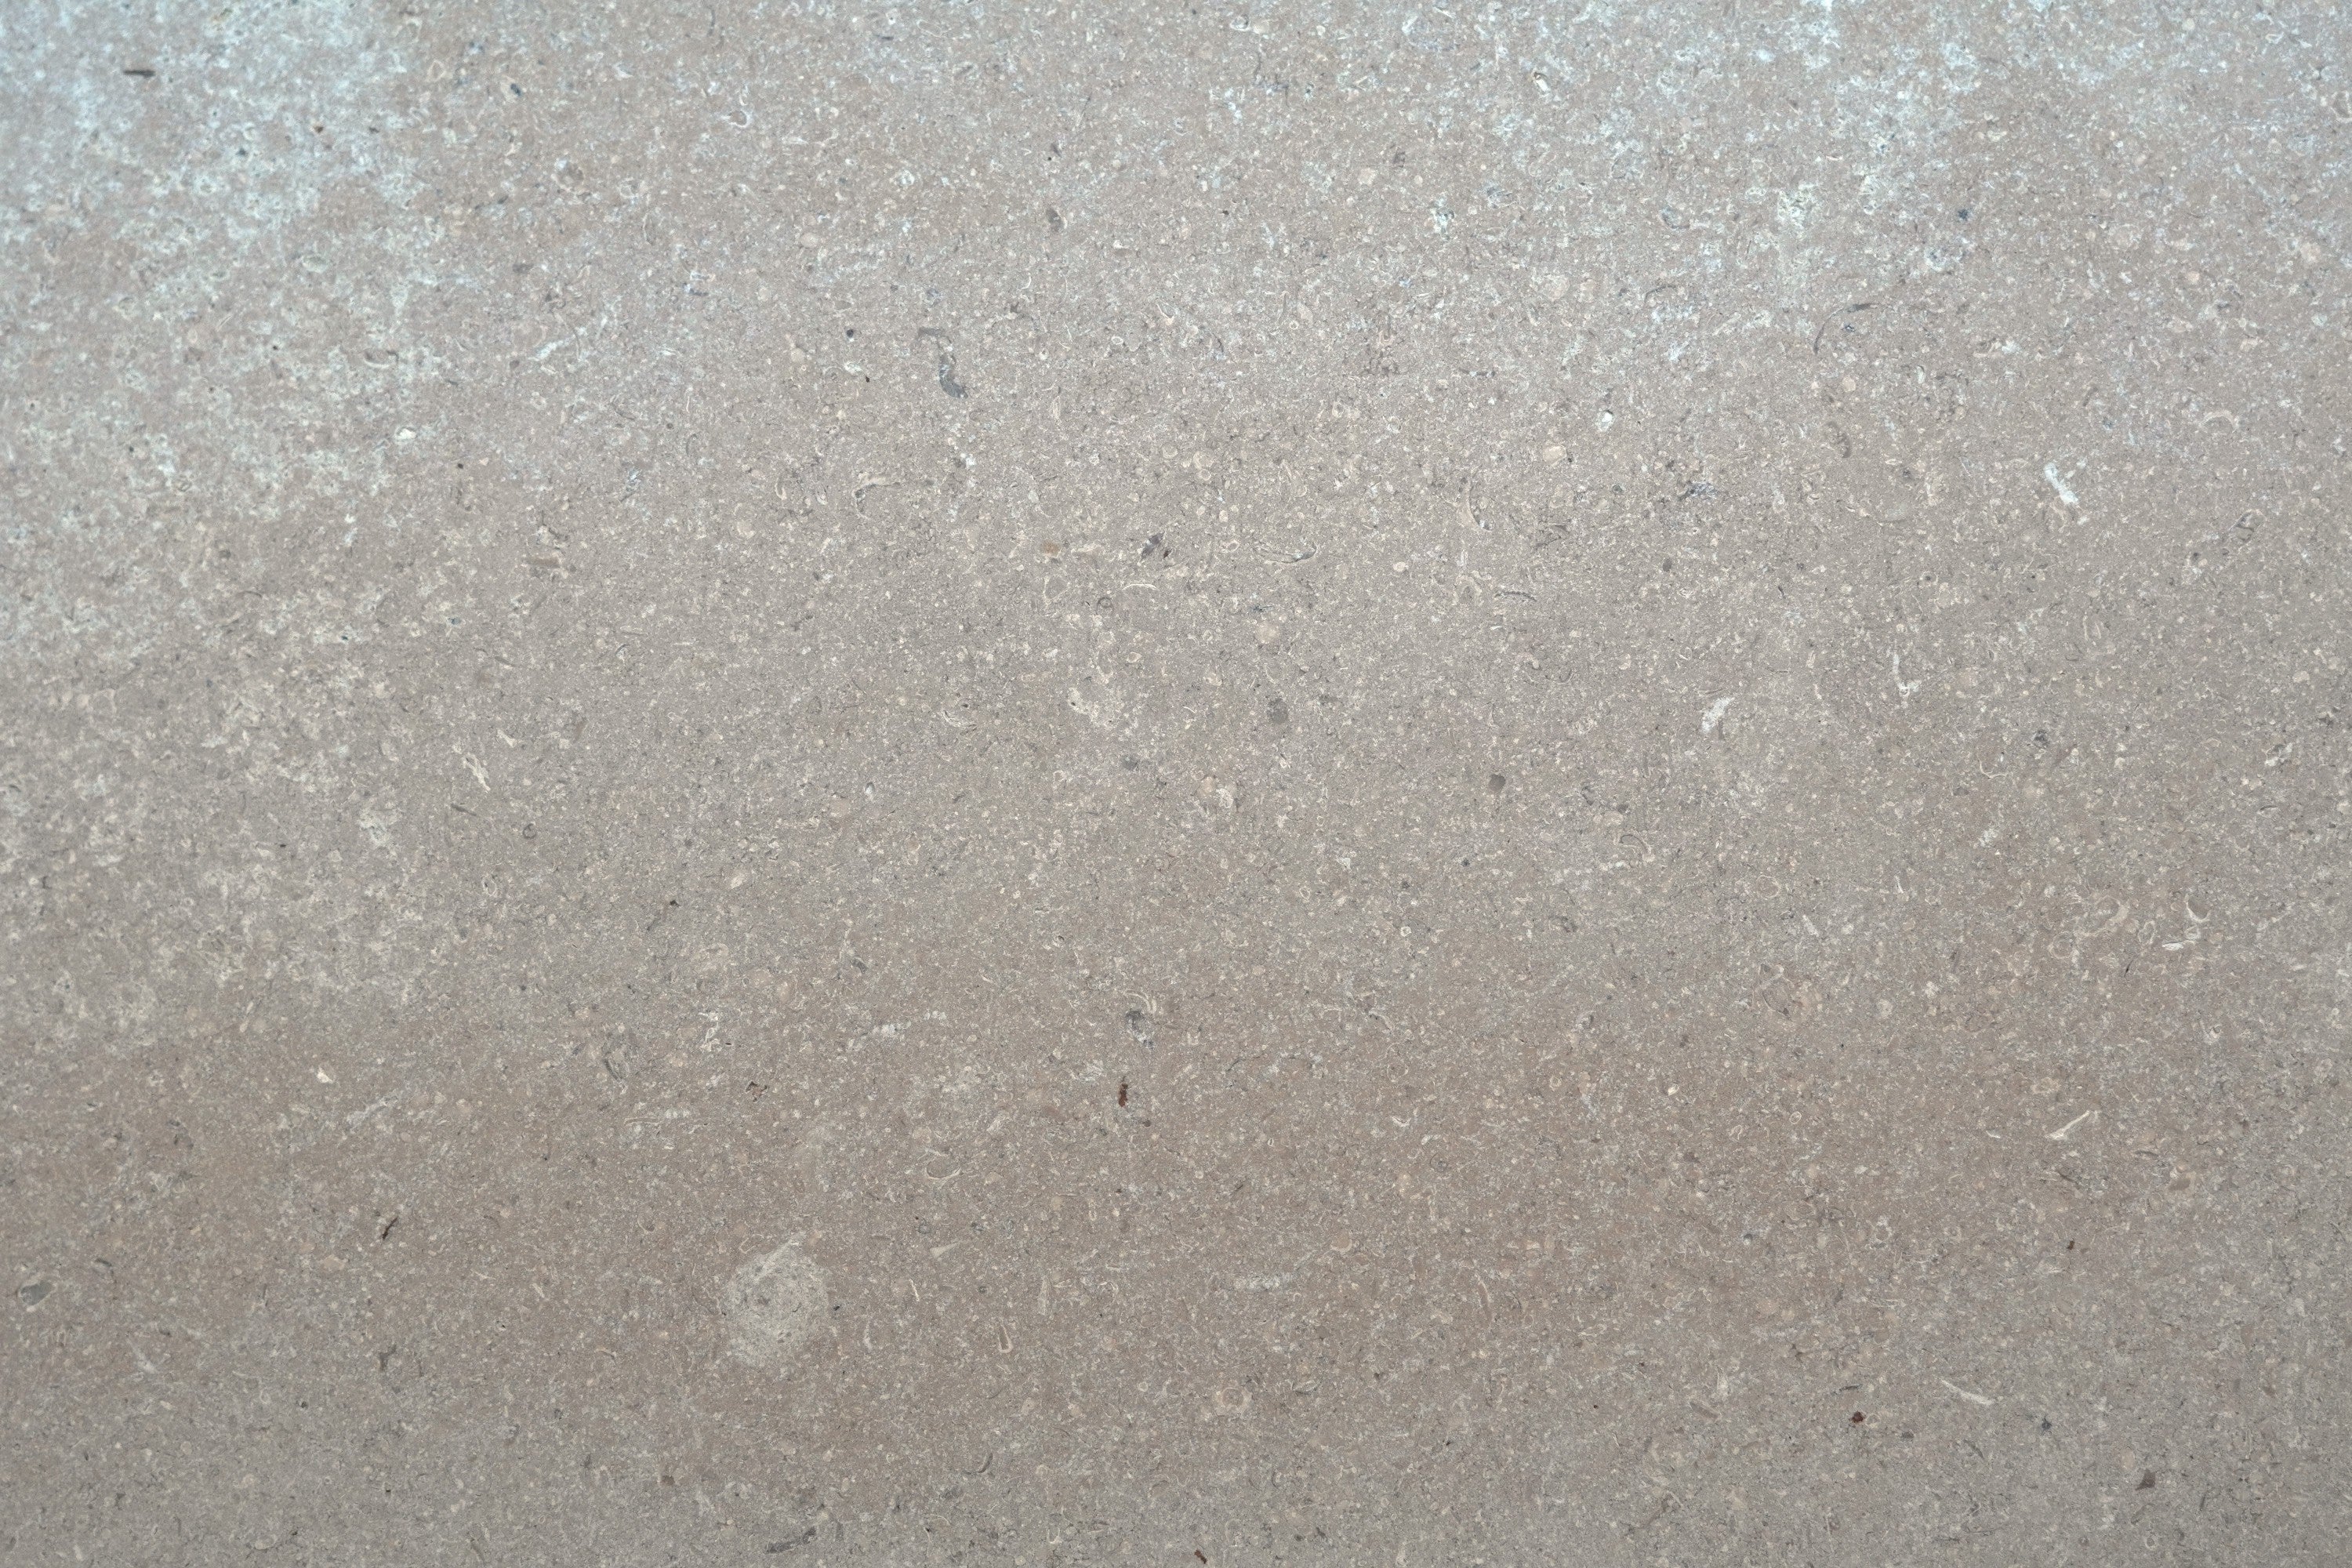 beige tumbled natural limestone field tile champagne taupe width of 8 length of 16 and thickness of 0.625 sold to you by surface group international